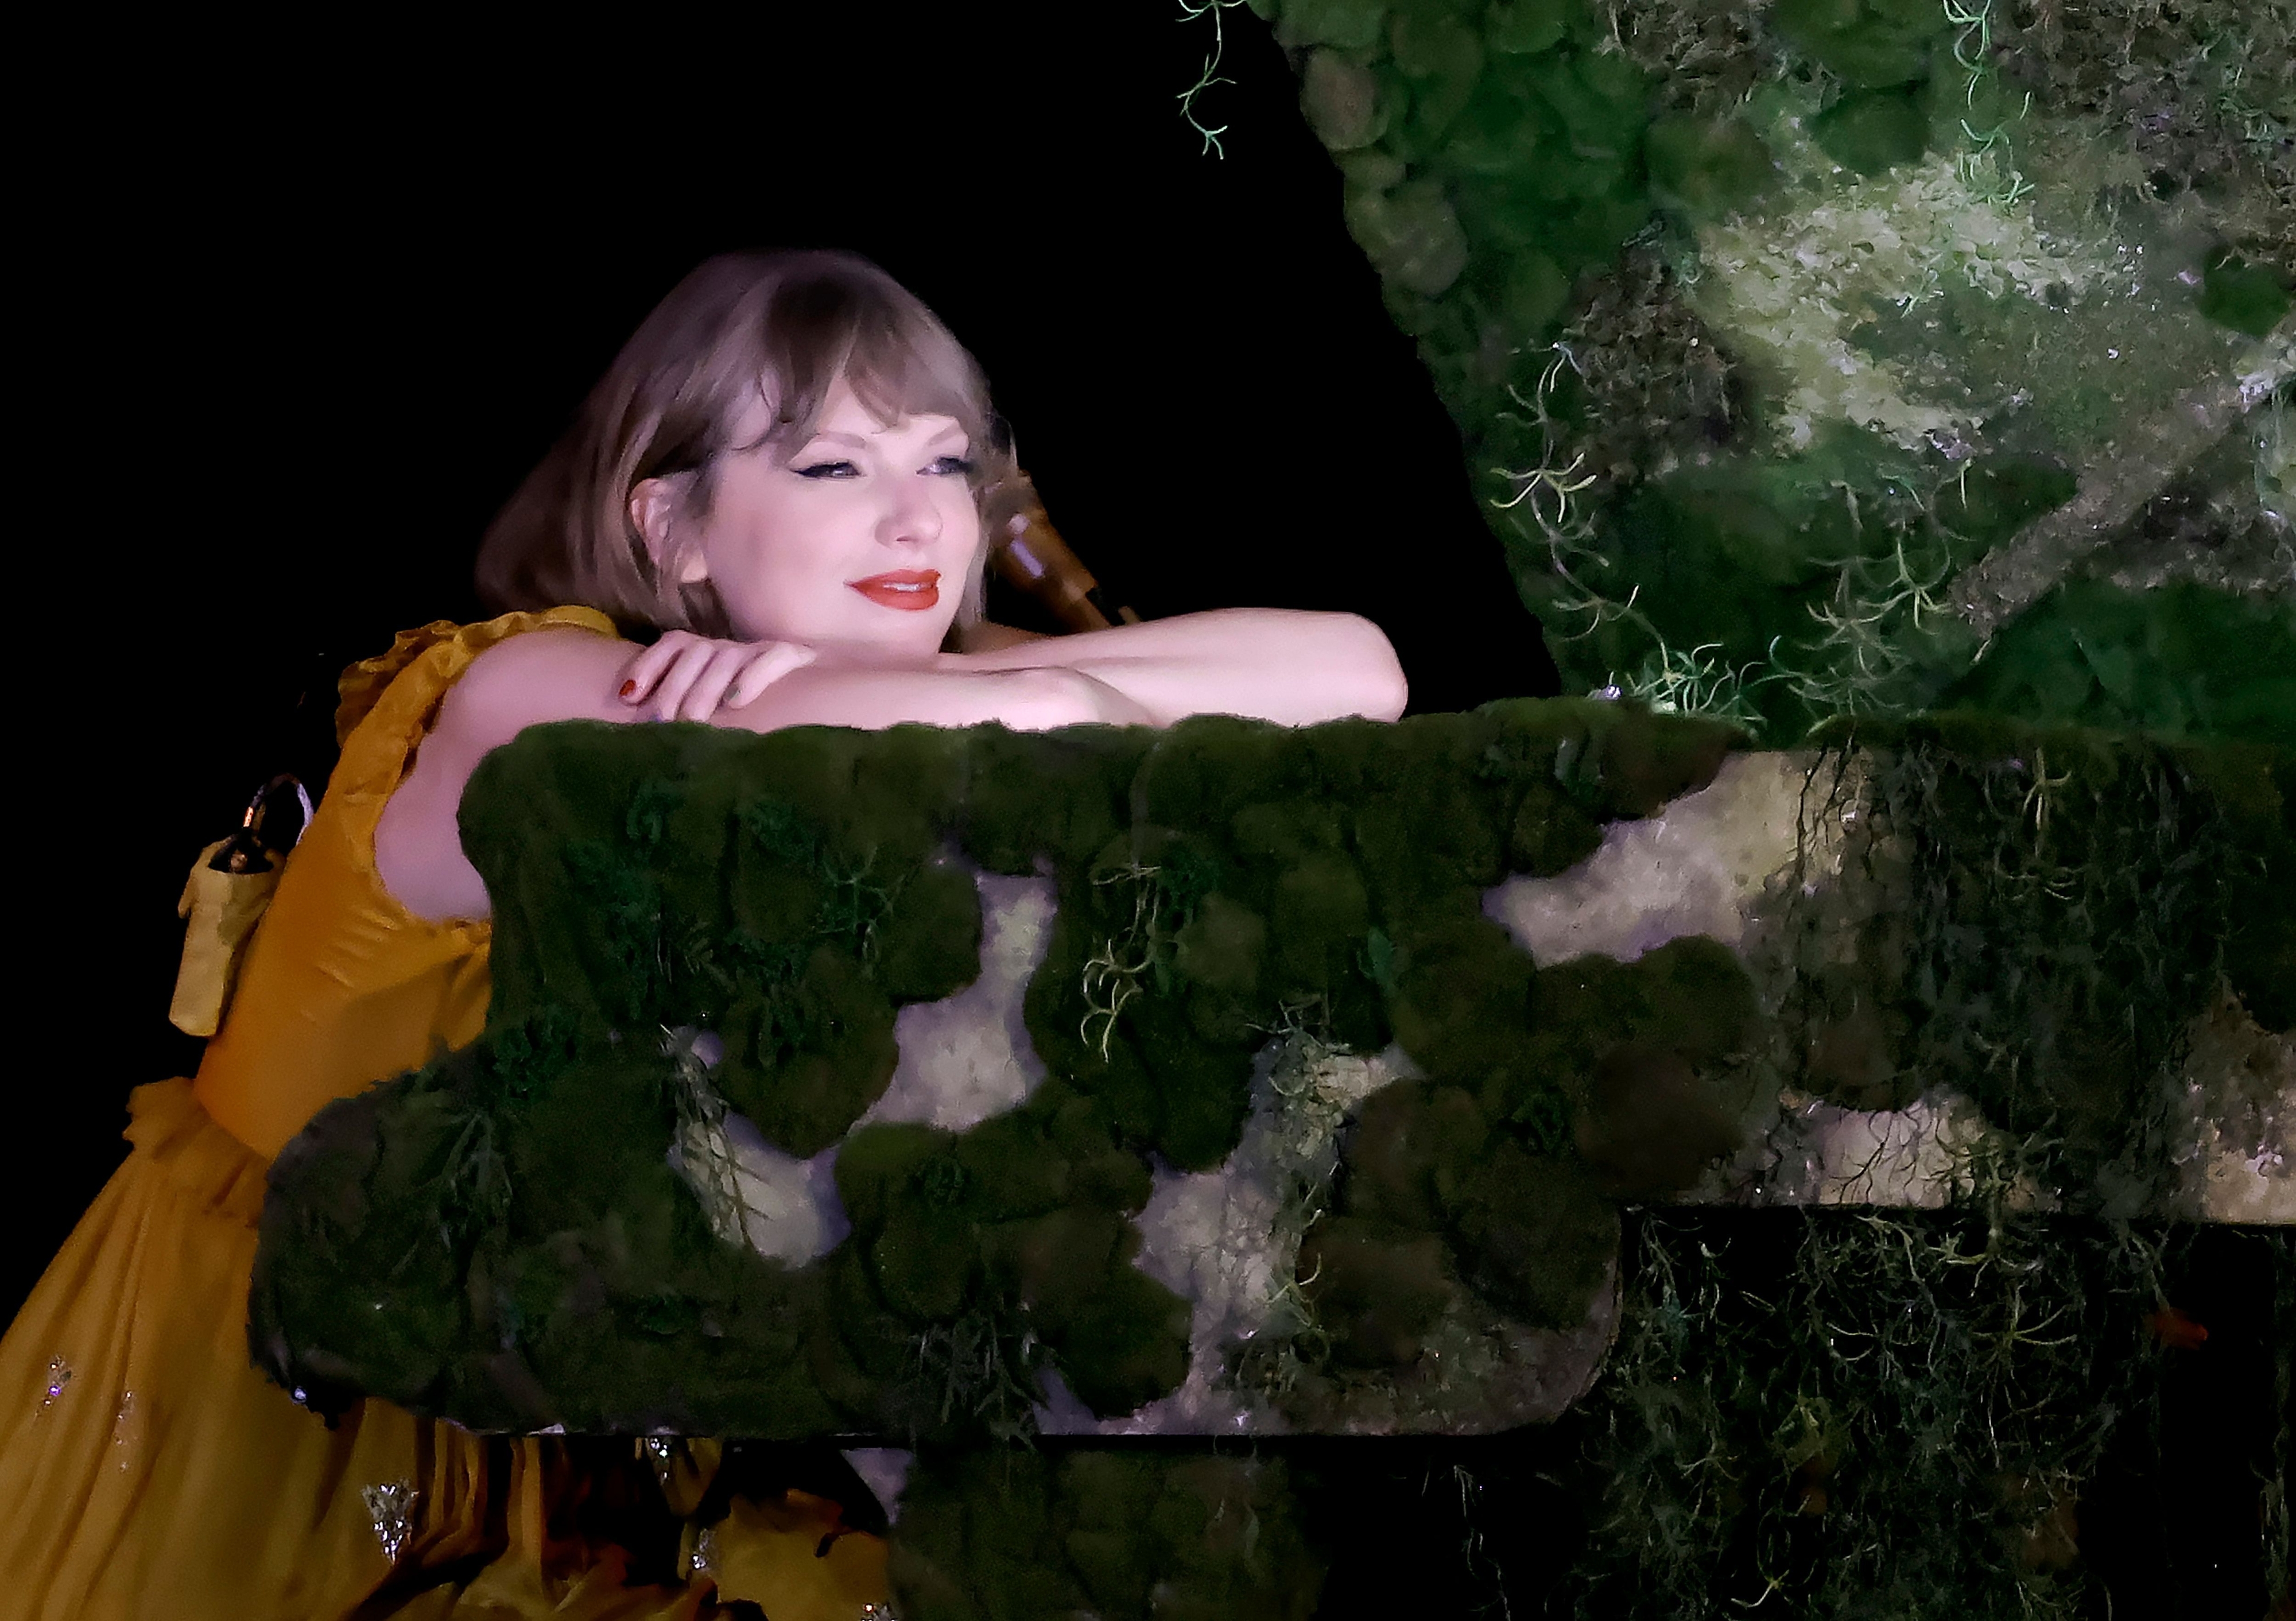 Taylor sitting and leaning against a piano covered in moss onstage